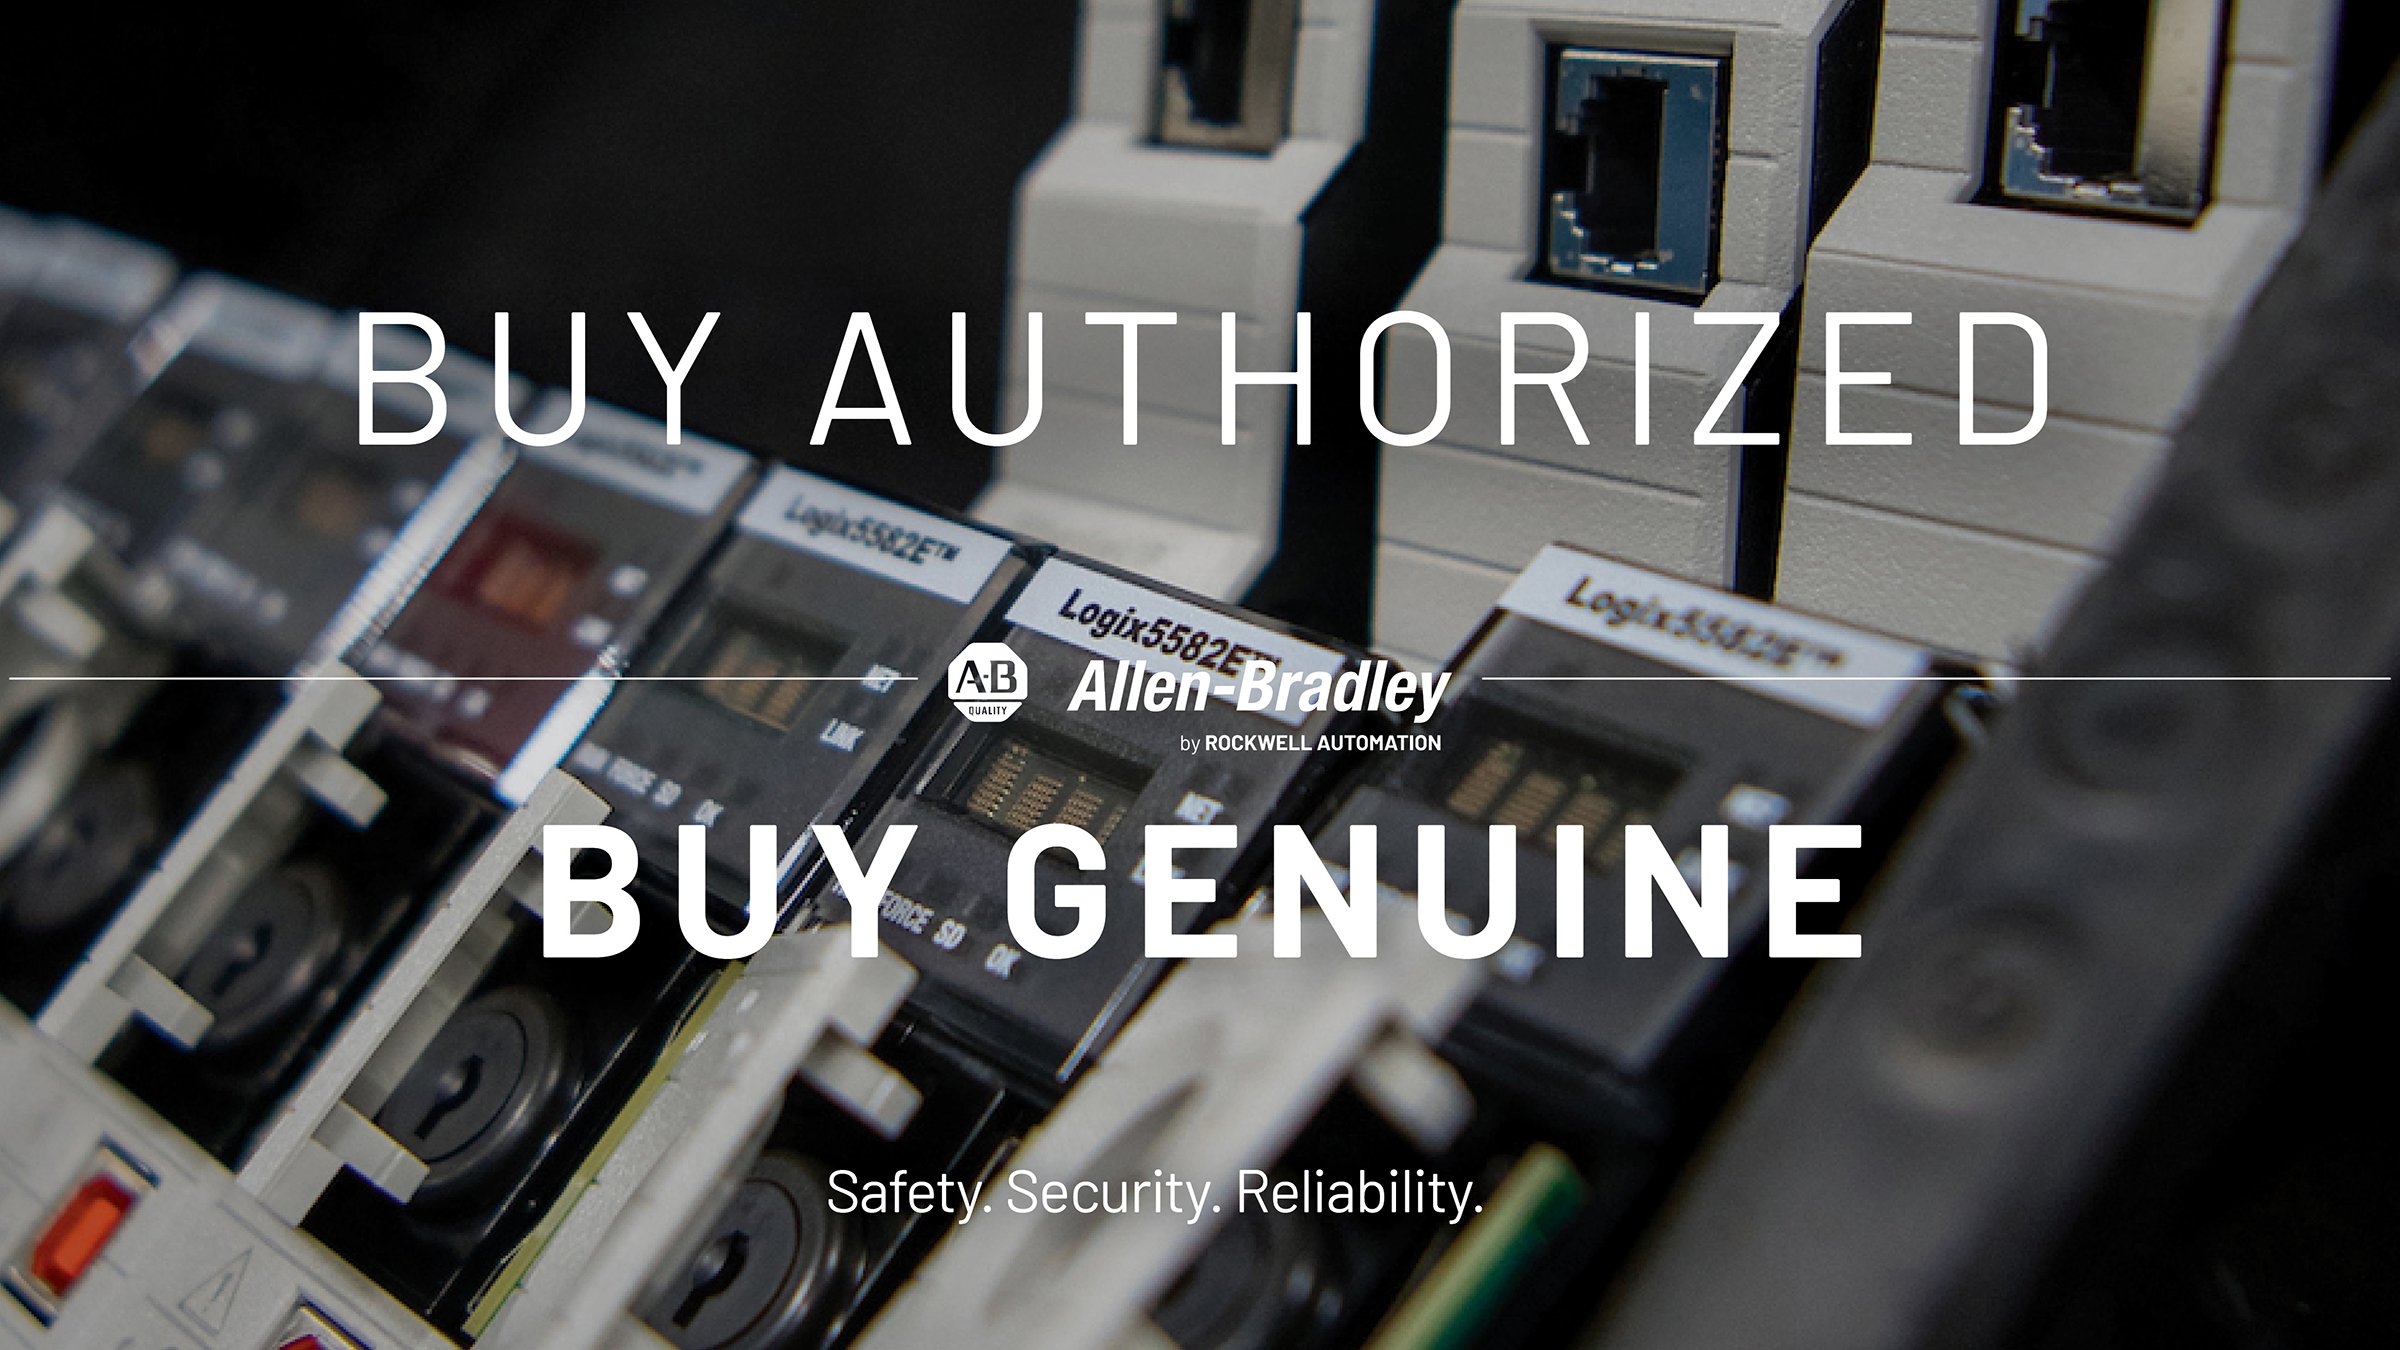 Buy authorized and genuine Rockwell Automation products